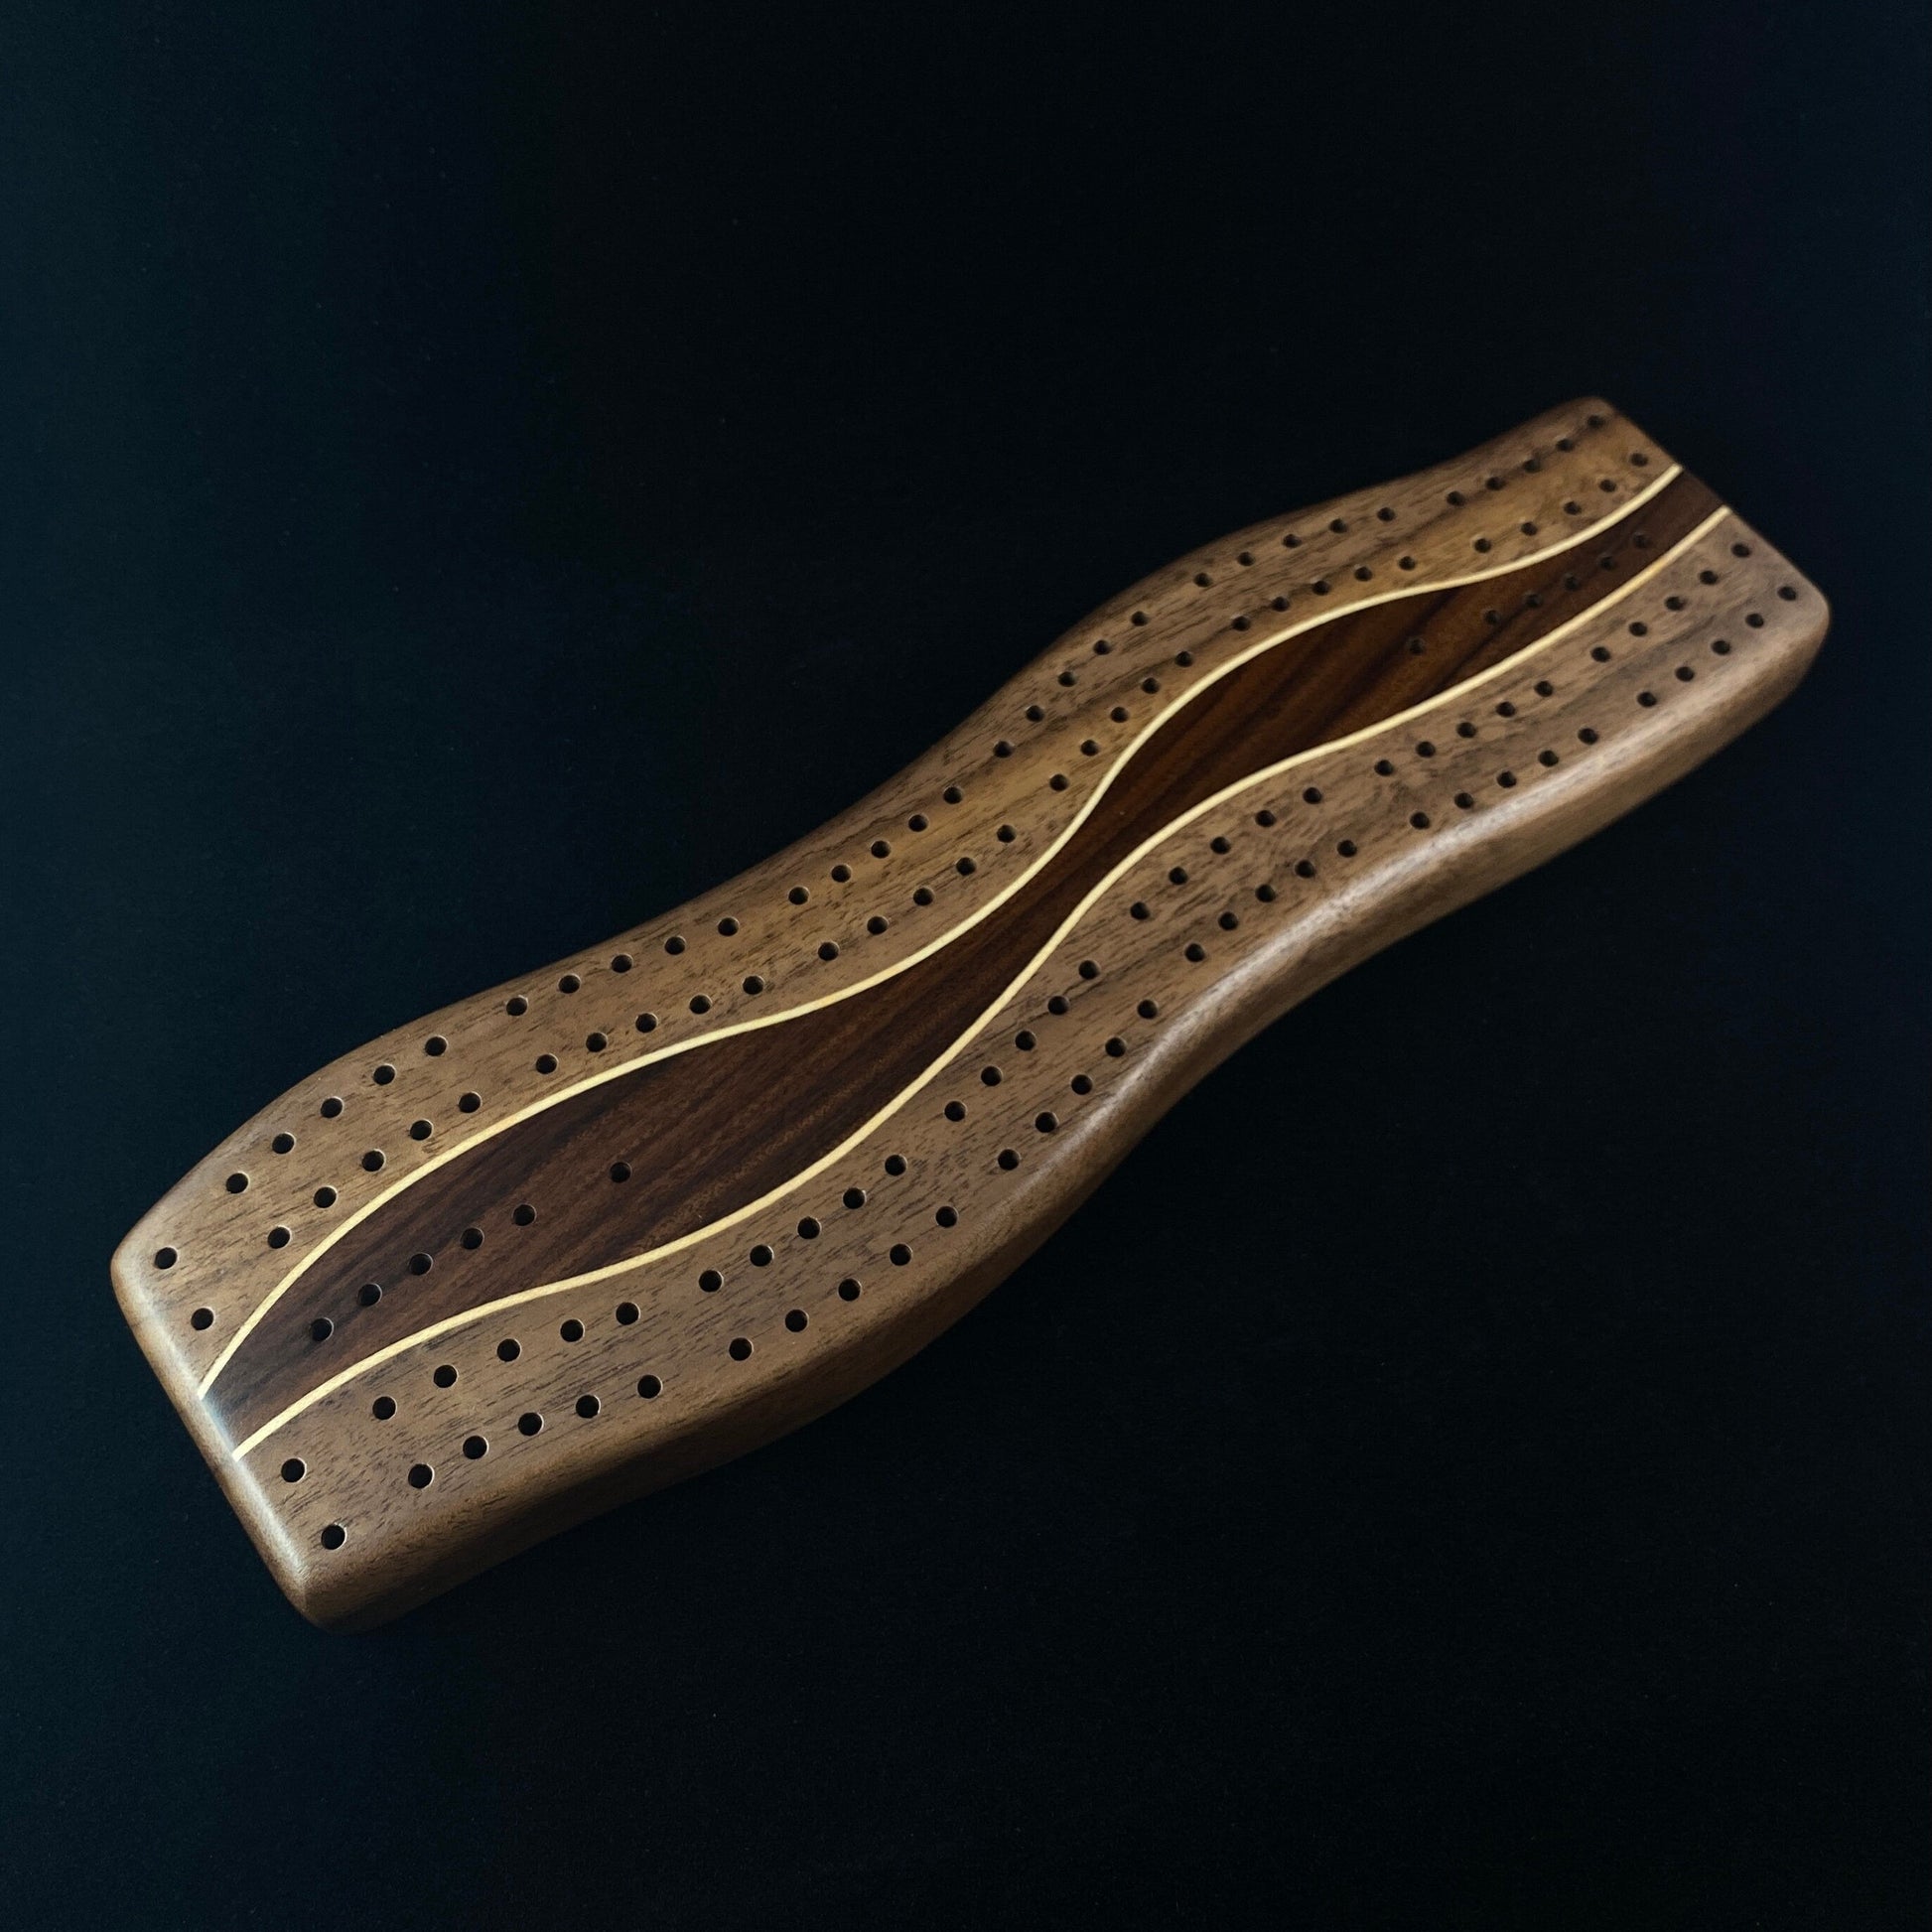 Center Wave Handmade Wooden Cribbage Board with Pegs - Walnut